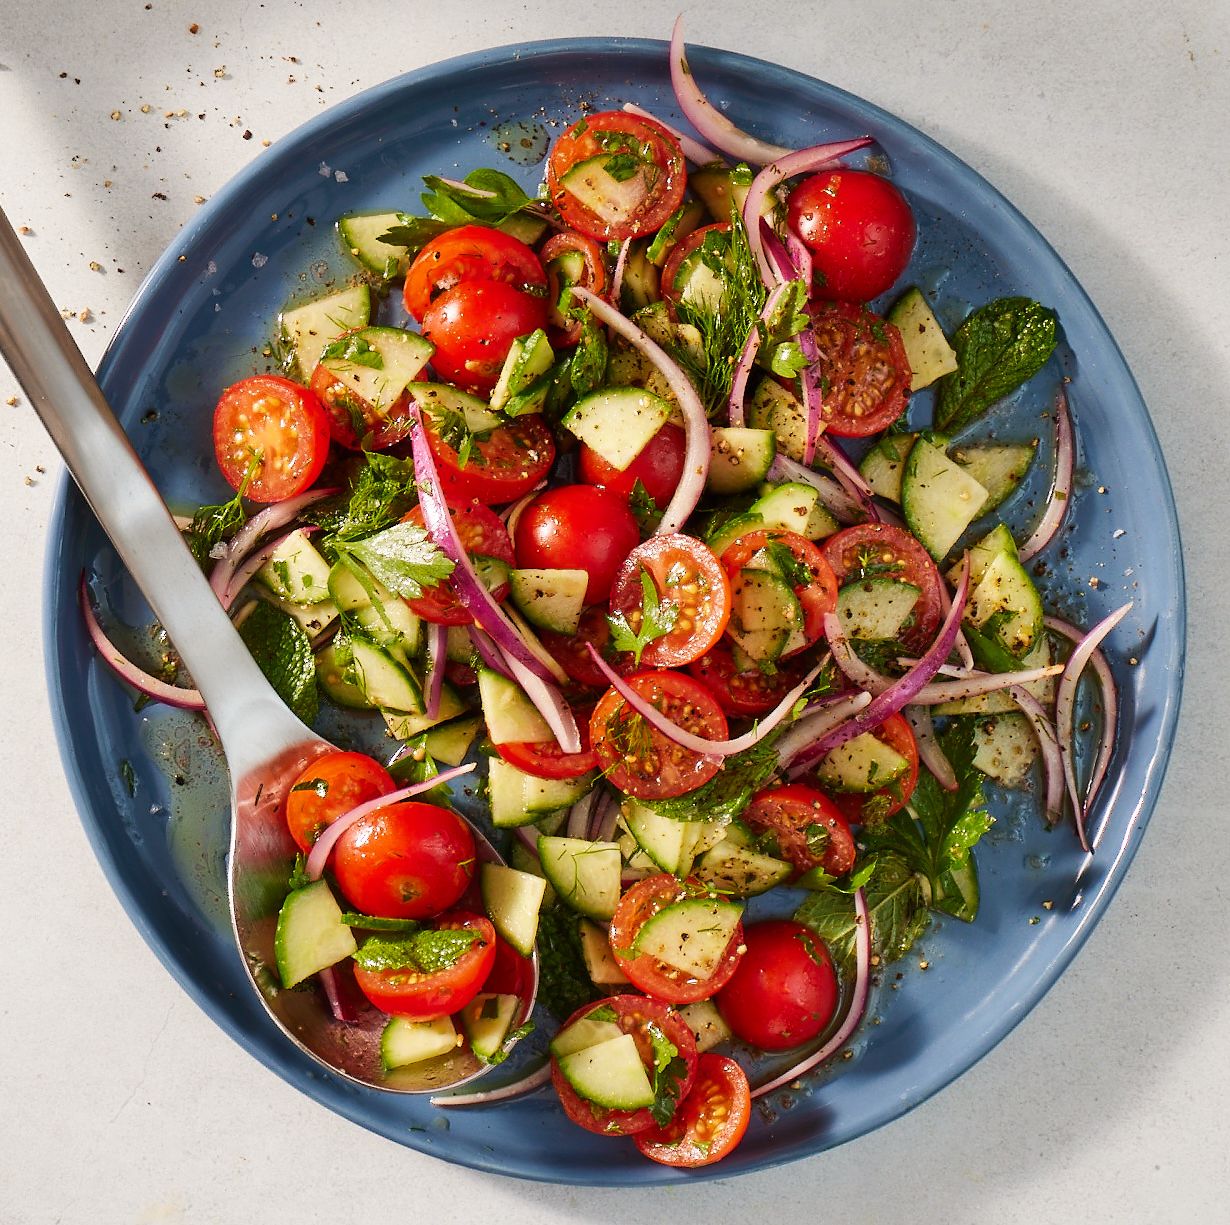 Cucumber, Tomato & Onion Salad Is The Most Refreshing Summer Side Dish